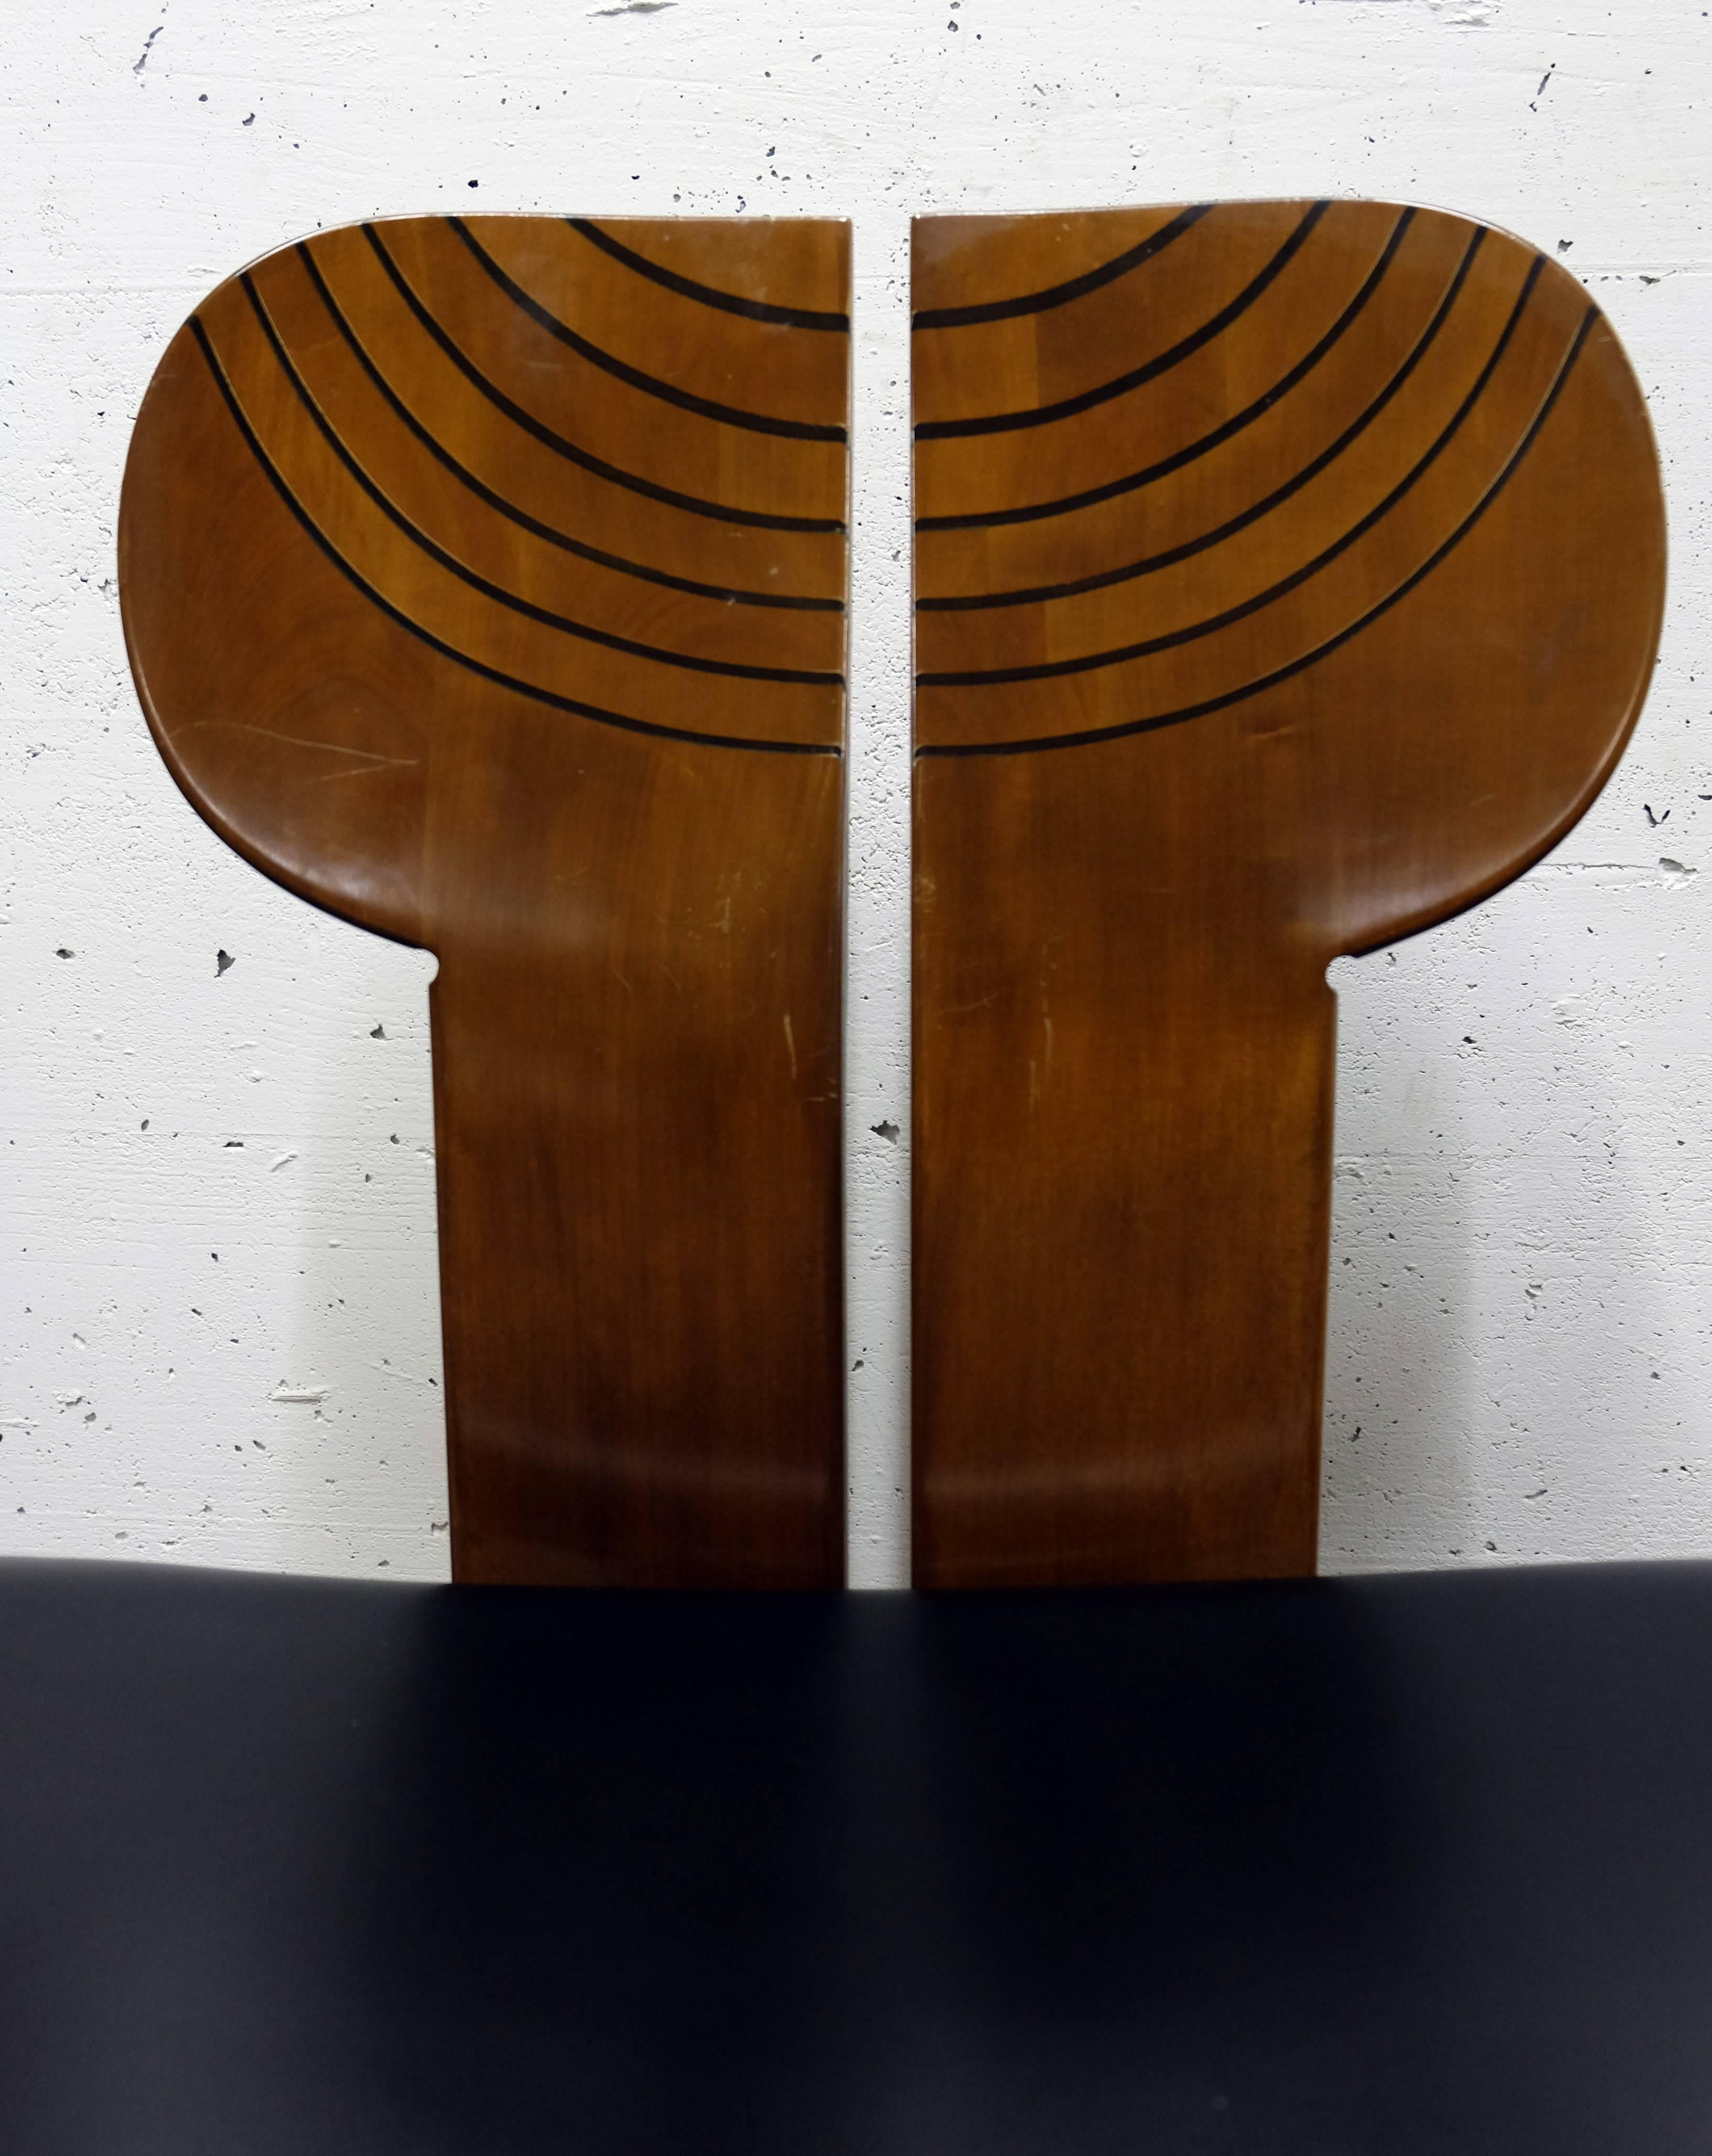 Pair of Africa Chairs by Afra and Tobia Scarpa, Maxalto Artona Series In Good Condition For Sale In Geneva, CH